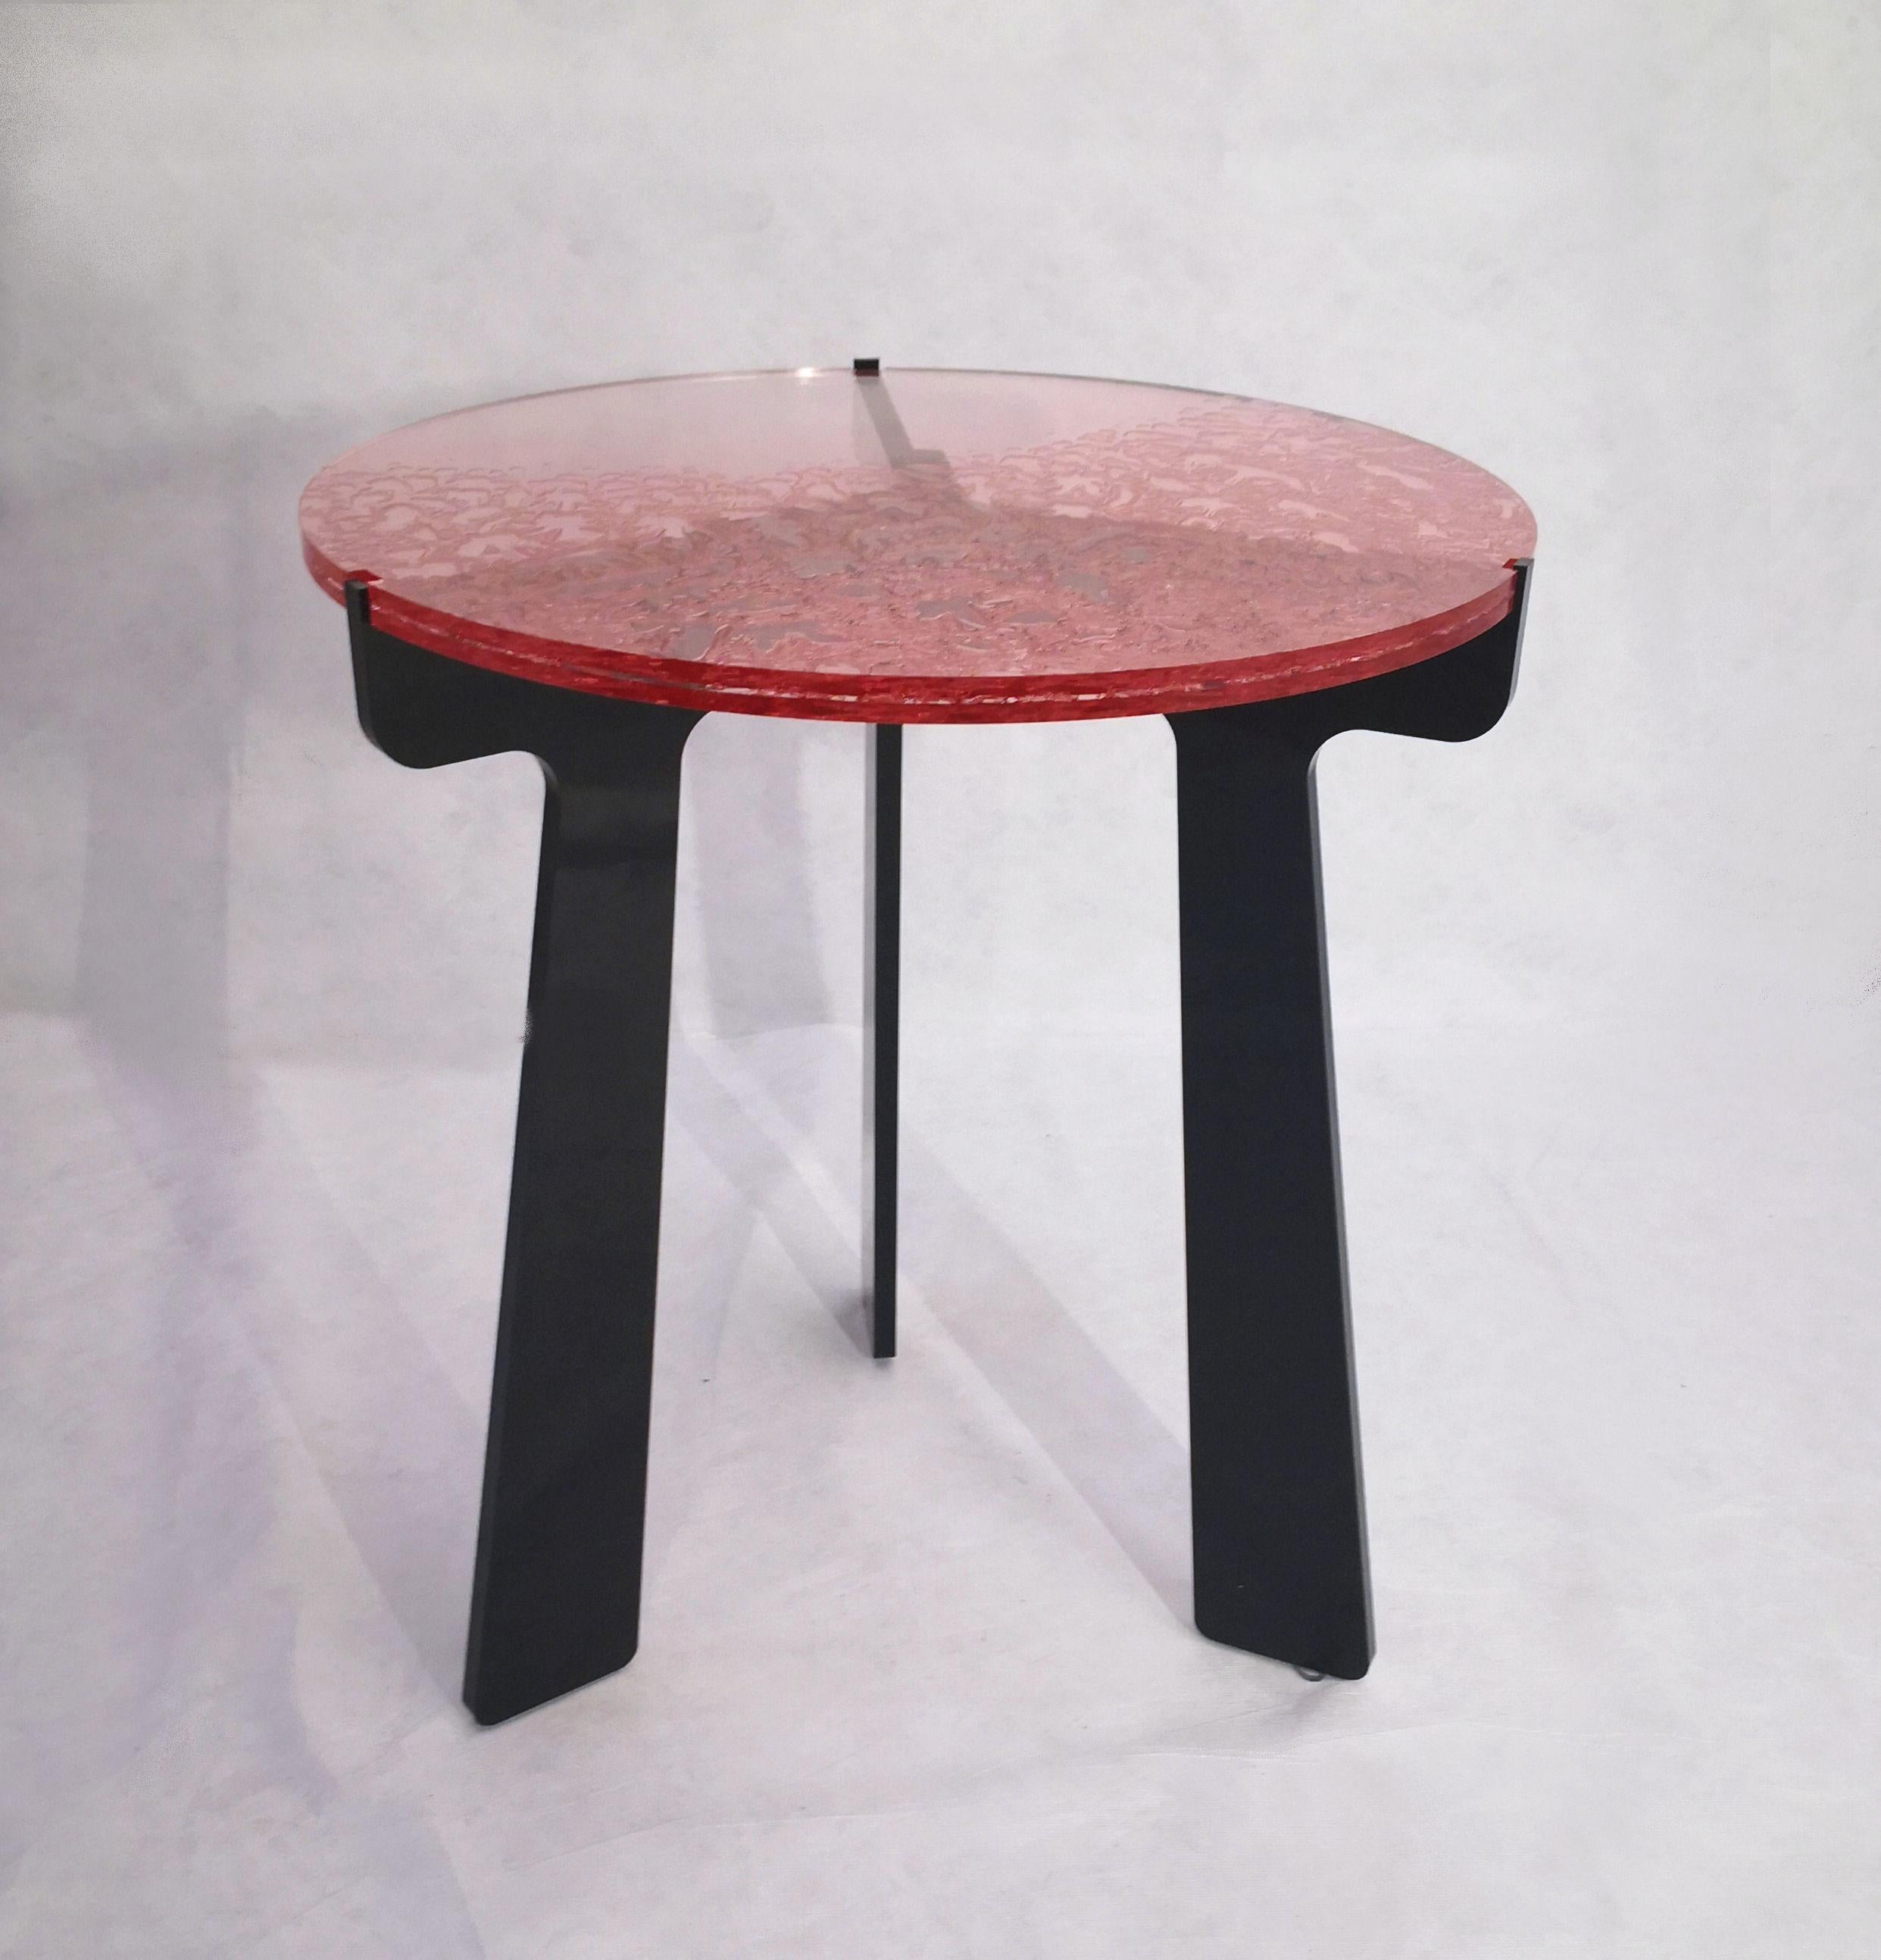 Italian Sketch Mini Sidetable Made of Pink Acrylic Des, Roberto Giacomucci in 2021 For Sale